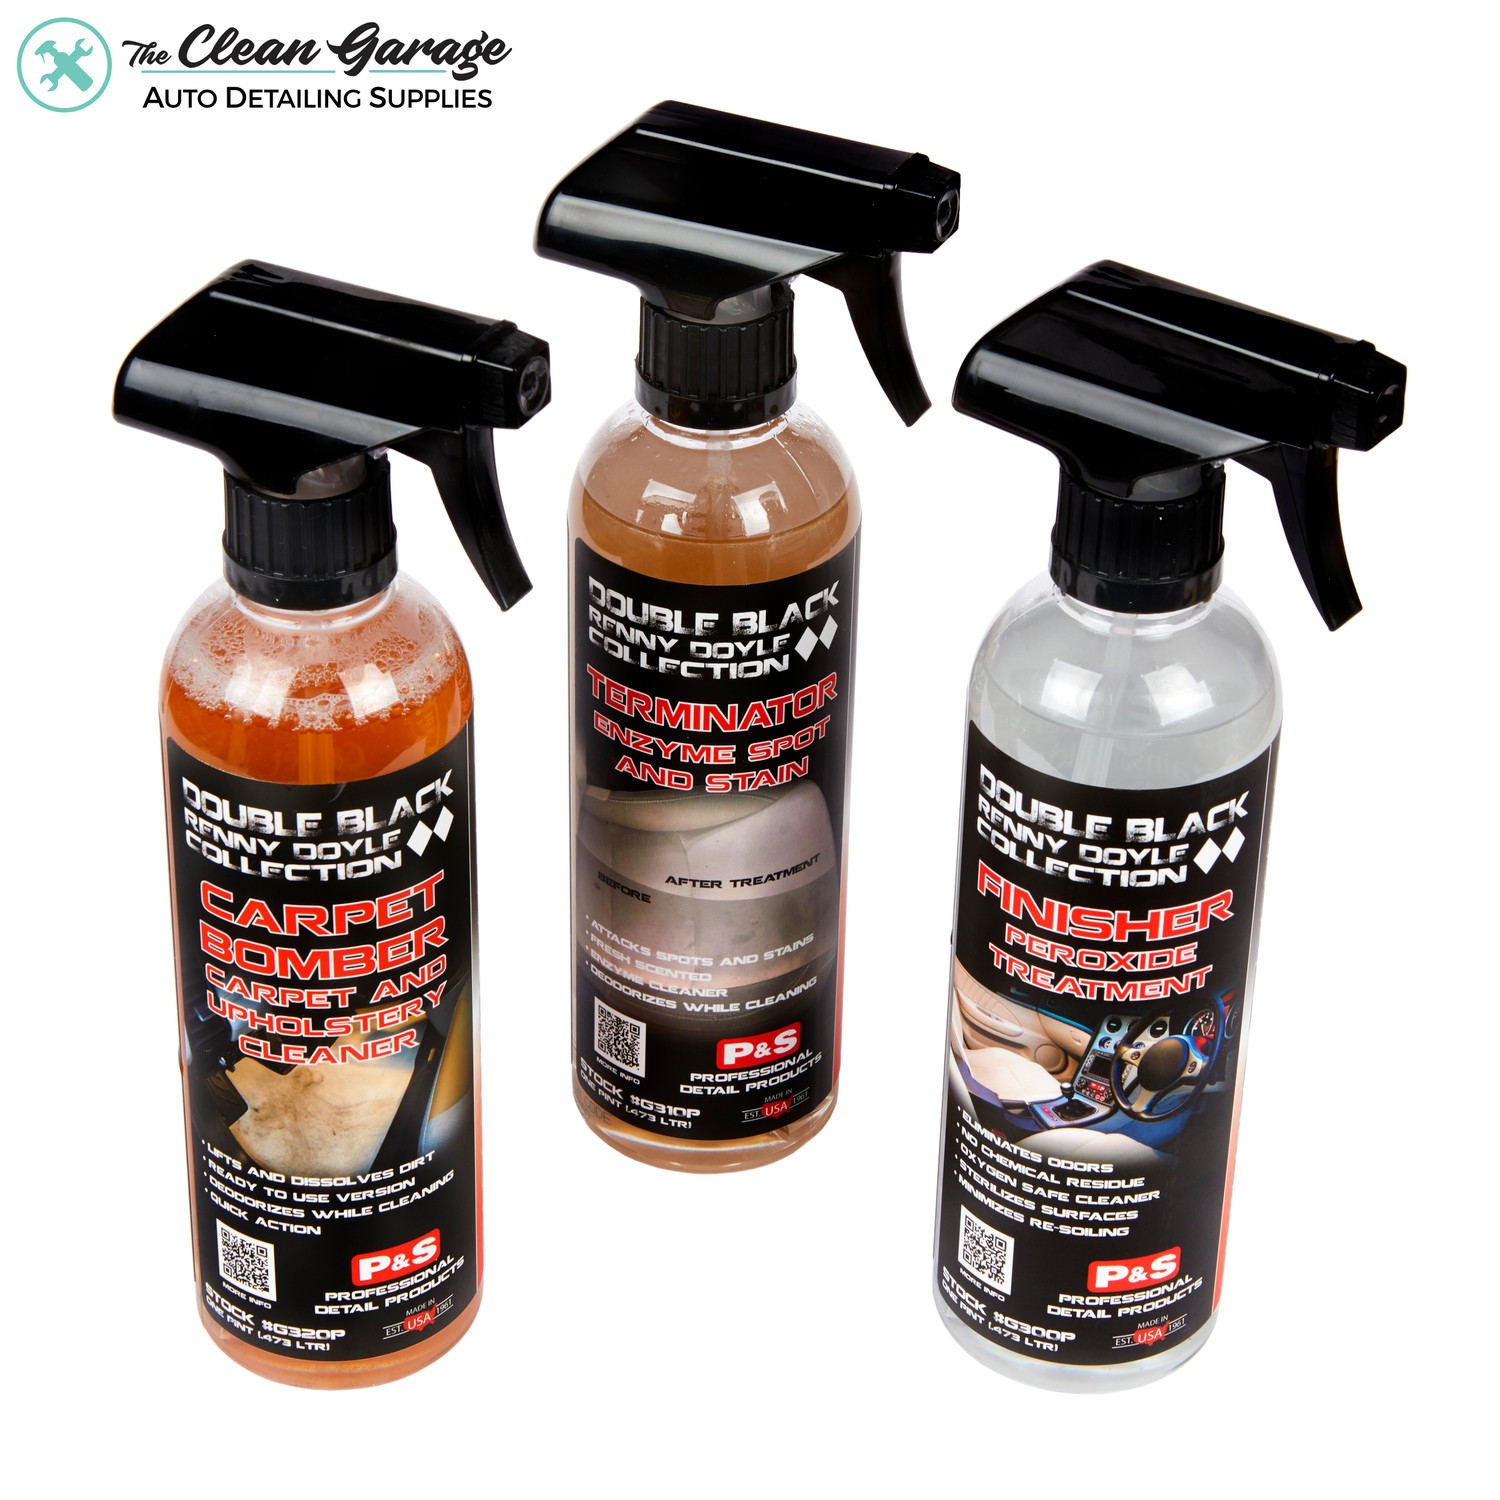 Automotive Accessories- Trim Spray Adhesive - Upholstery Contact